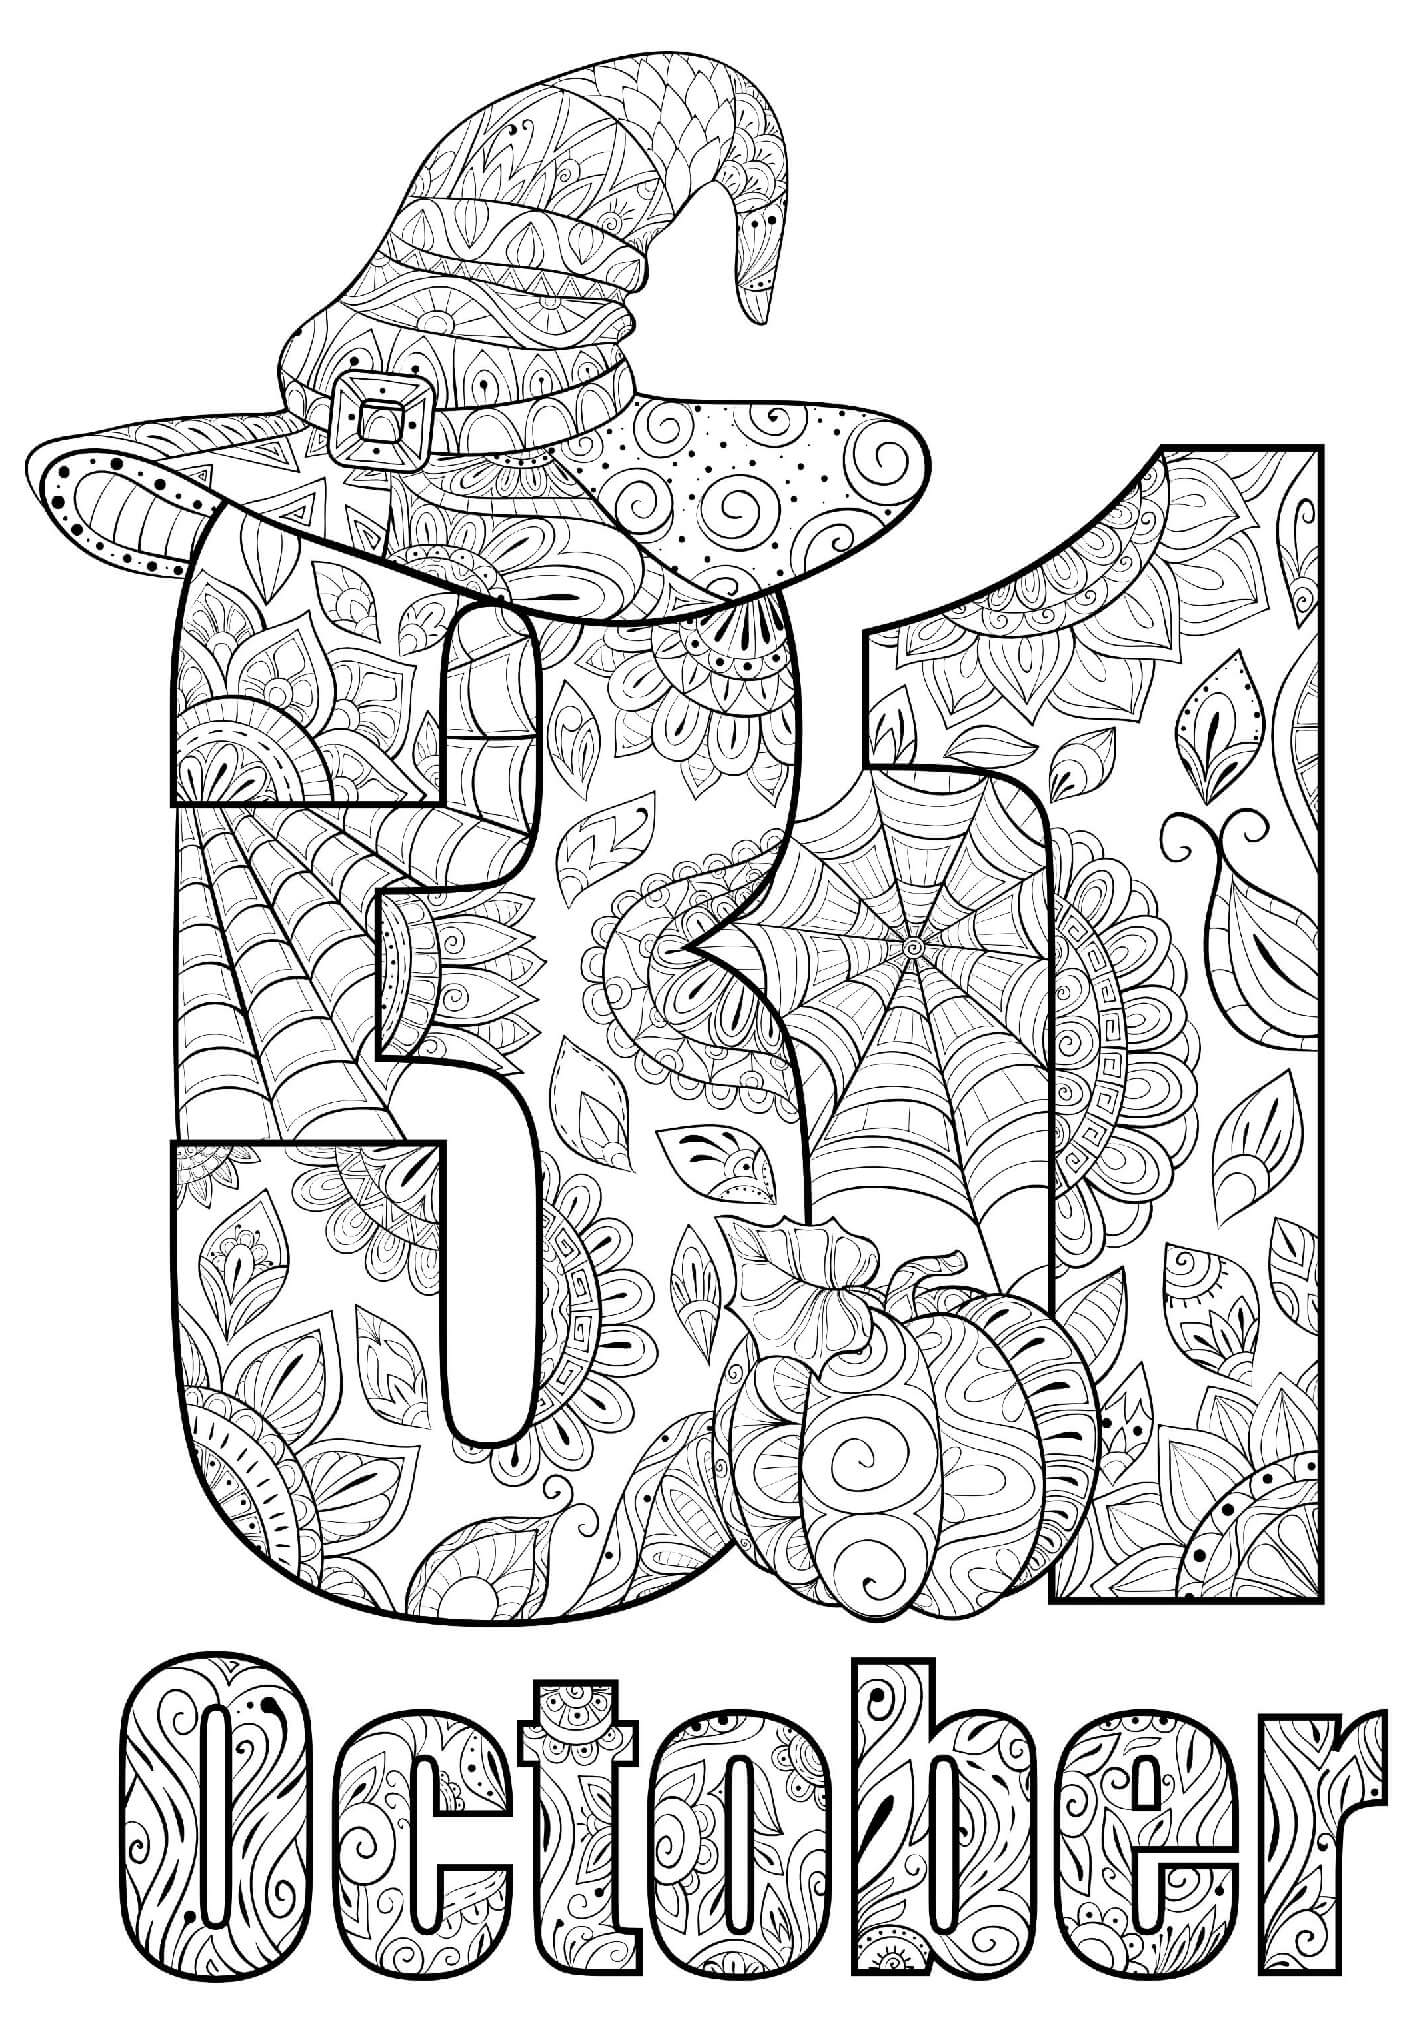 Halloween 31 October Coloring Page